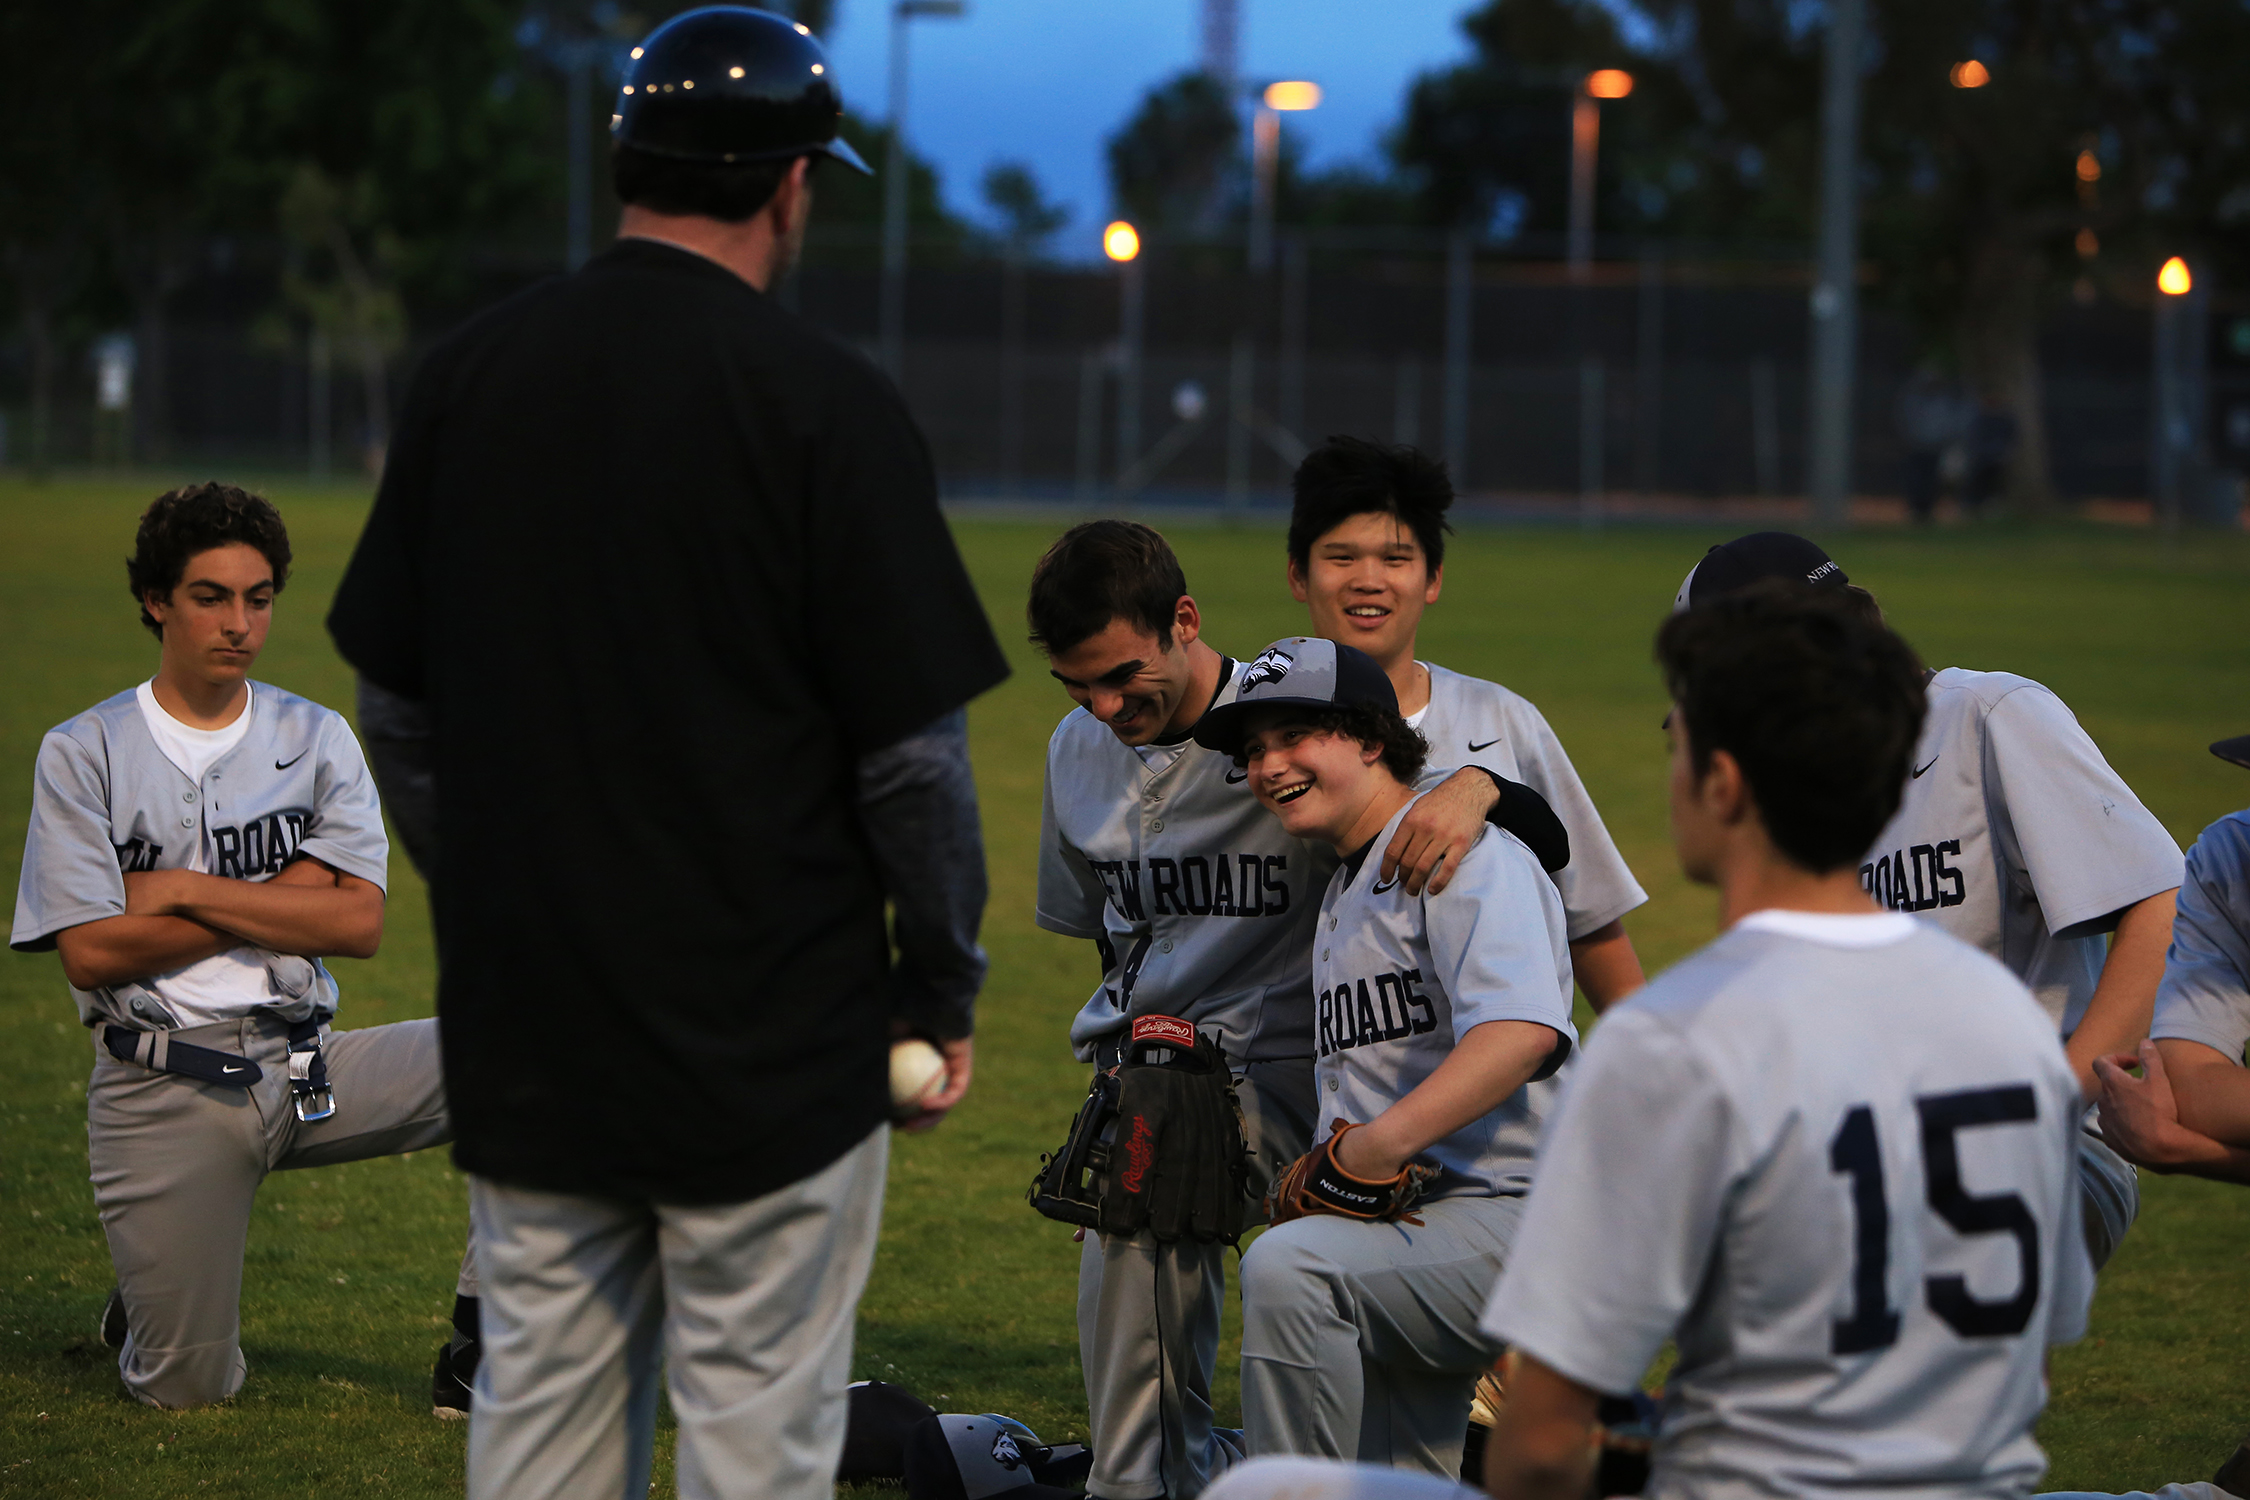  After struggling in middle school to belong, Hofheimer, center, has found a home with his team. "I have the baseball team, I have my friends whom I hang out with on a regular basis. I'm friends with a fair amount of people now, I think."&nbsp;© Gail